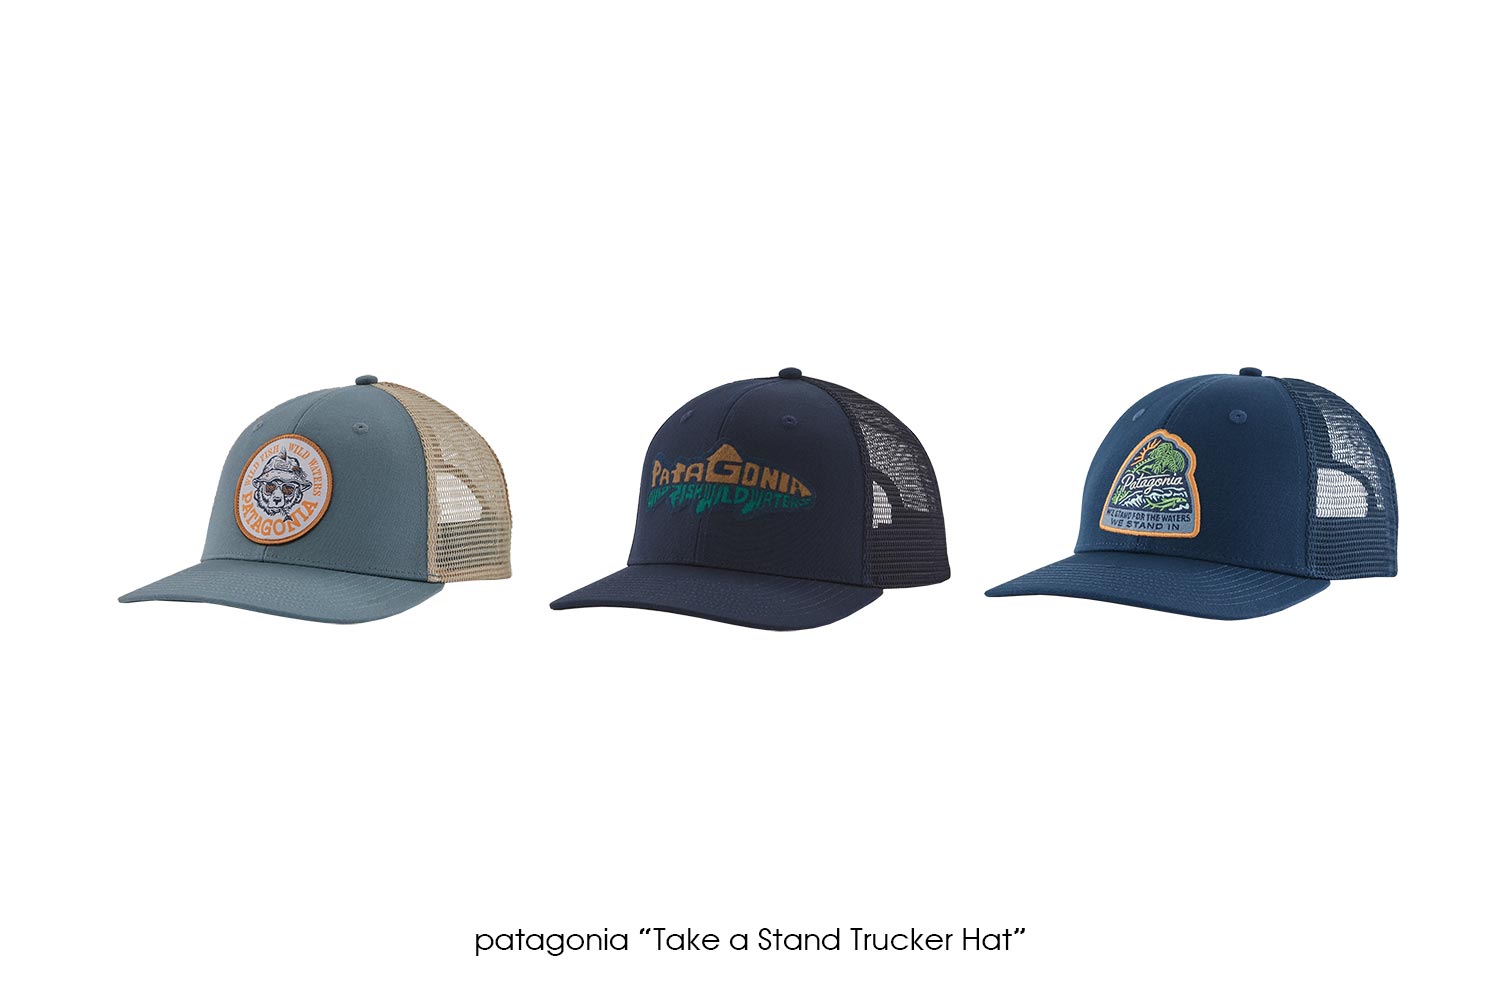 patagonia "Take a Stand Trucker Hat"